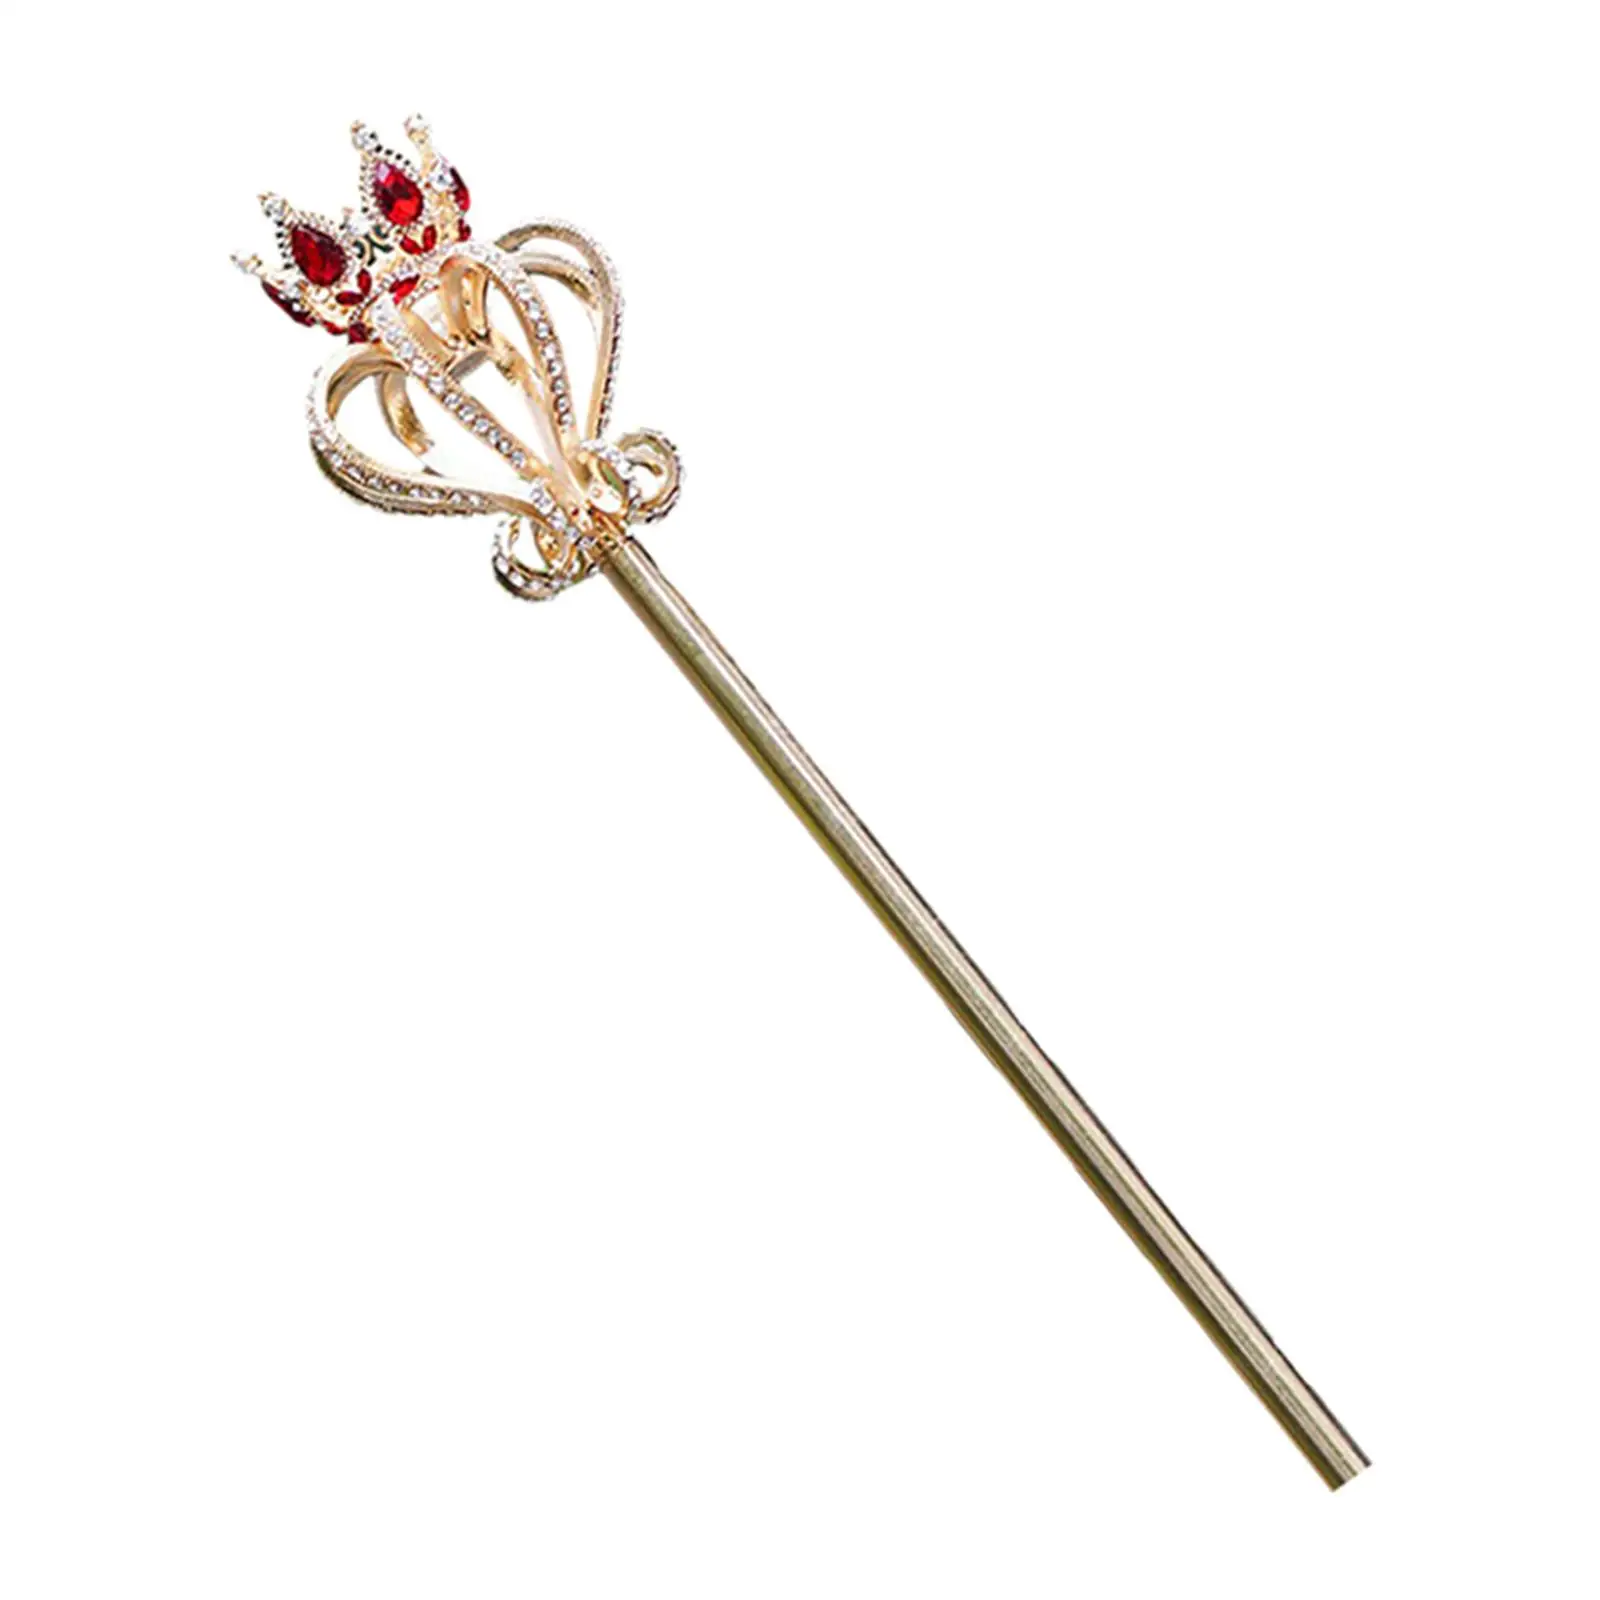 Princess Wands Christmas Pageant Sparkly Fancy Dress Handheld King Masquerade Dress up Rhinestone Scepter Scepter for Queen